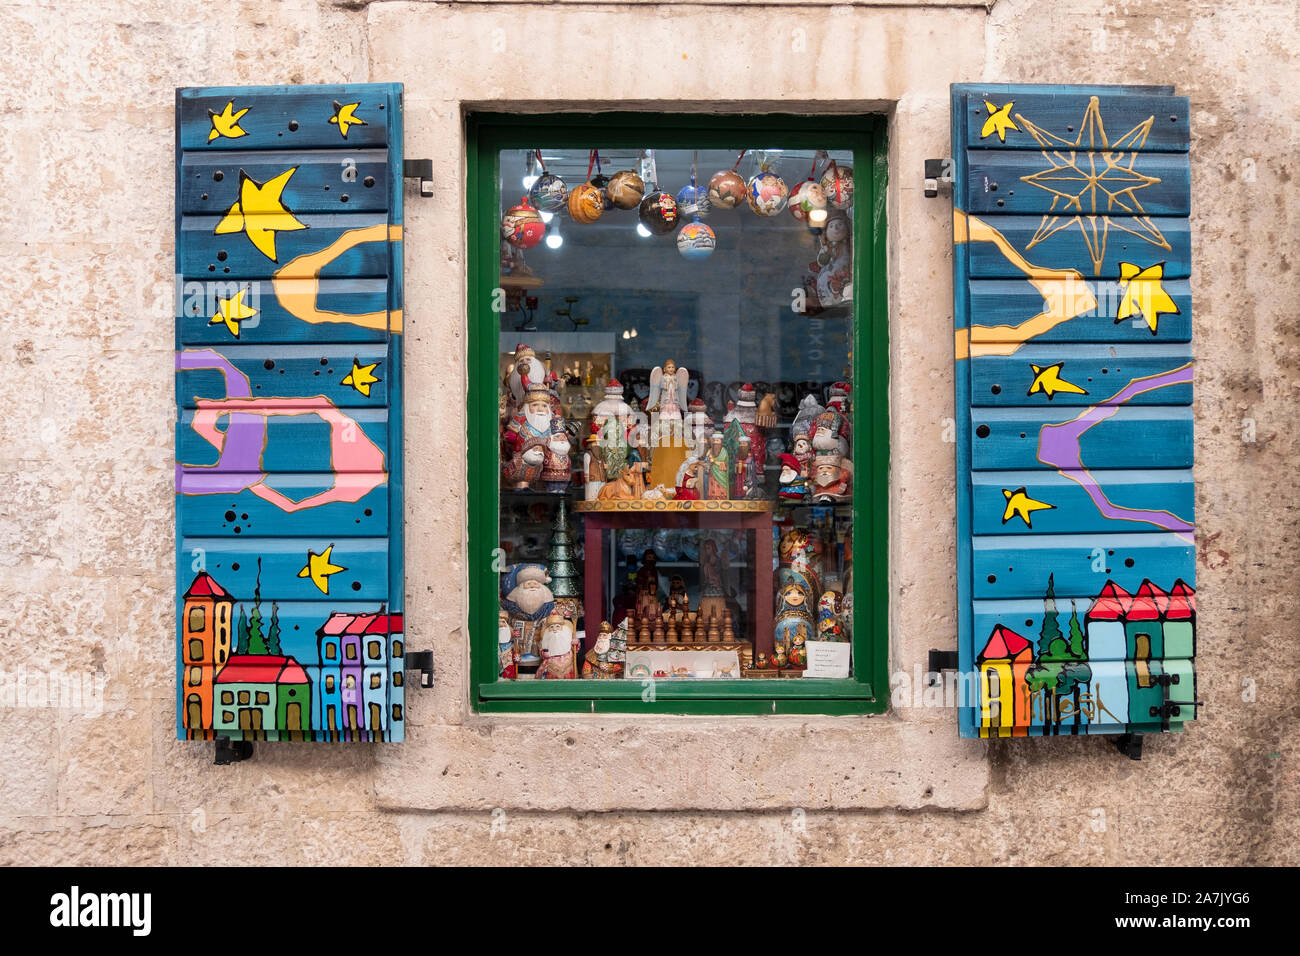 A gift shop window with ornate shutters in the old town section of Kotor Montenegro. On display is a section of Christmas ornaments. Stock Photo